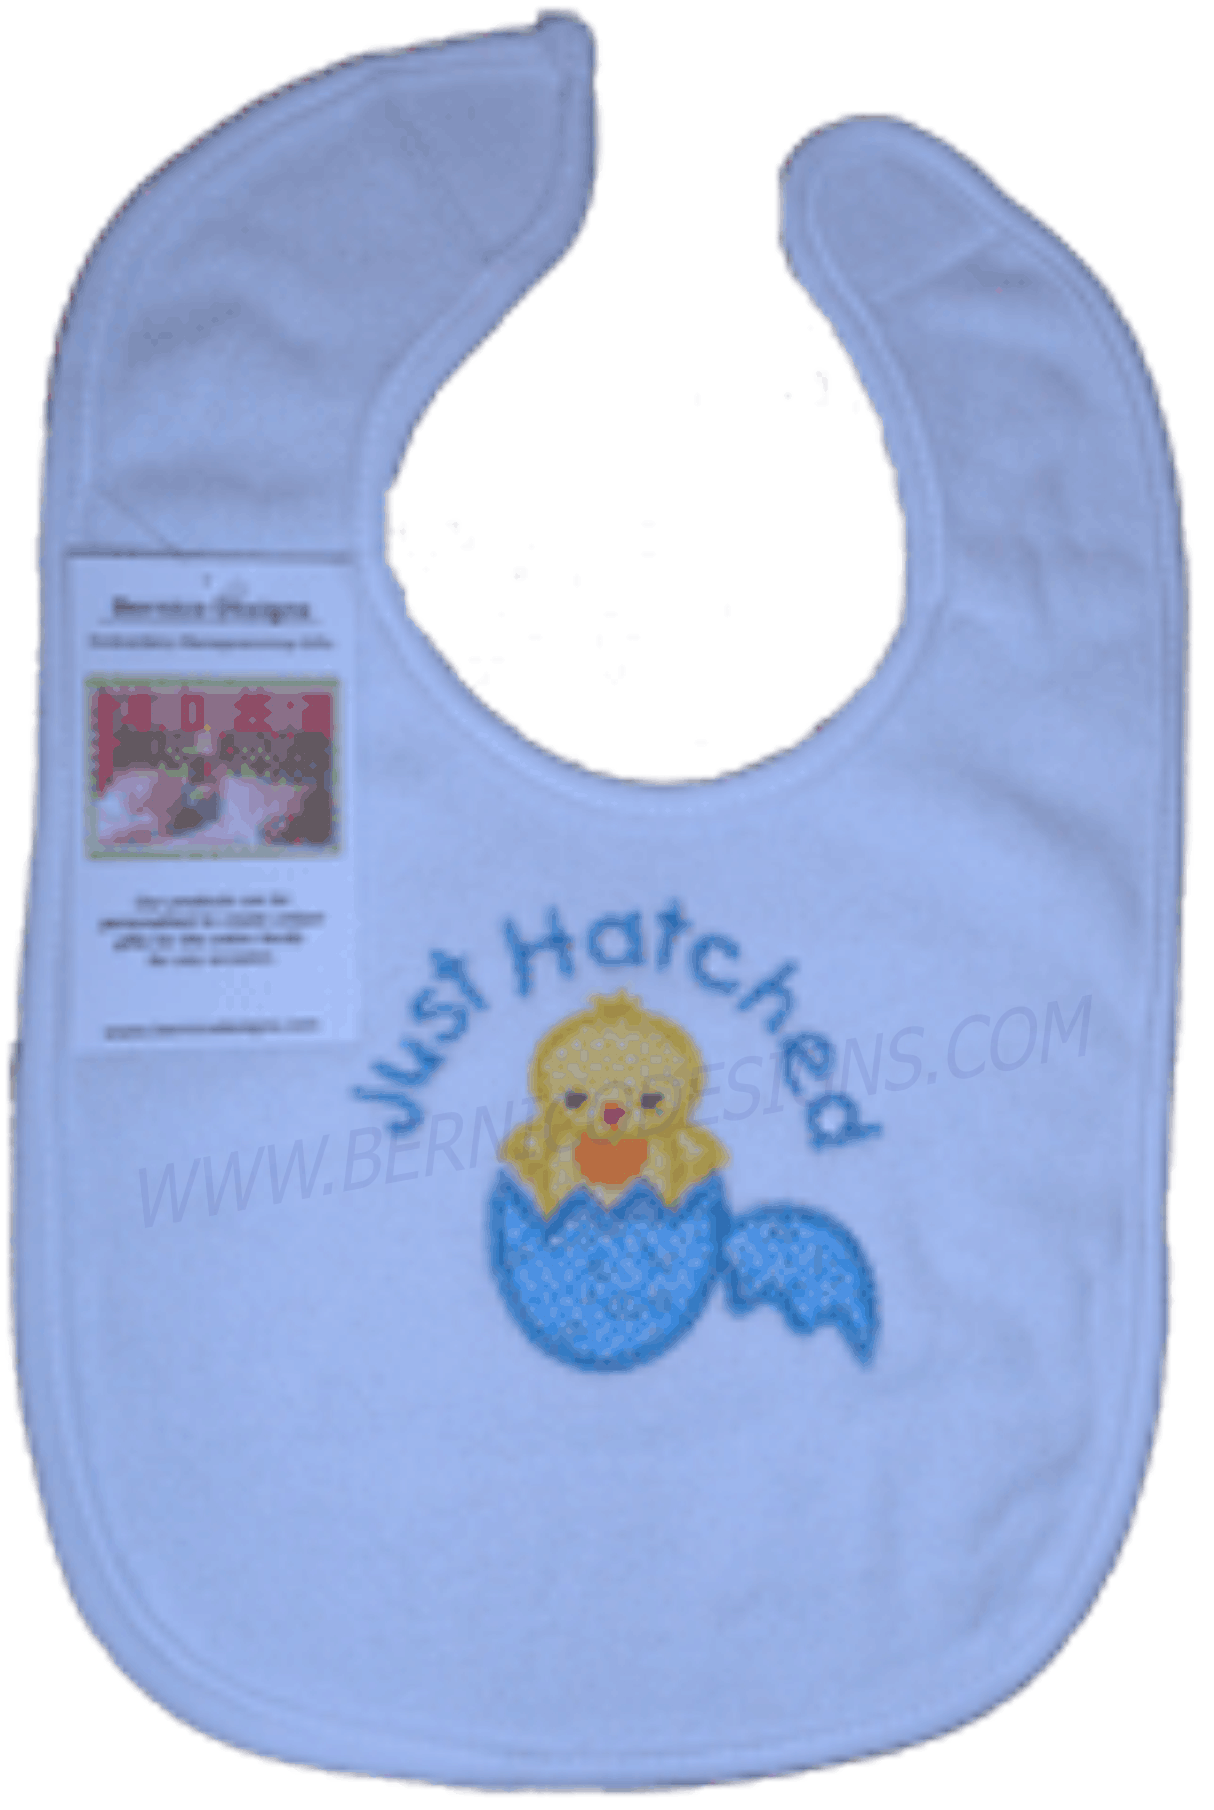 Bib - Personalized Custom and Monogrammed Bib for Baby Boy - Just Hatched-#B18